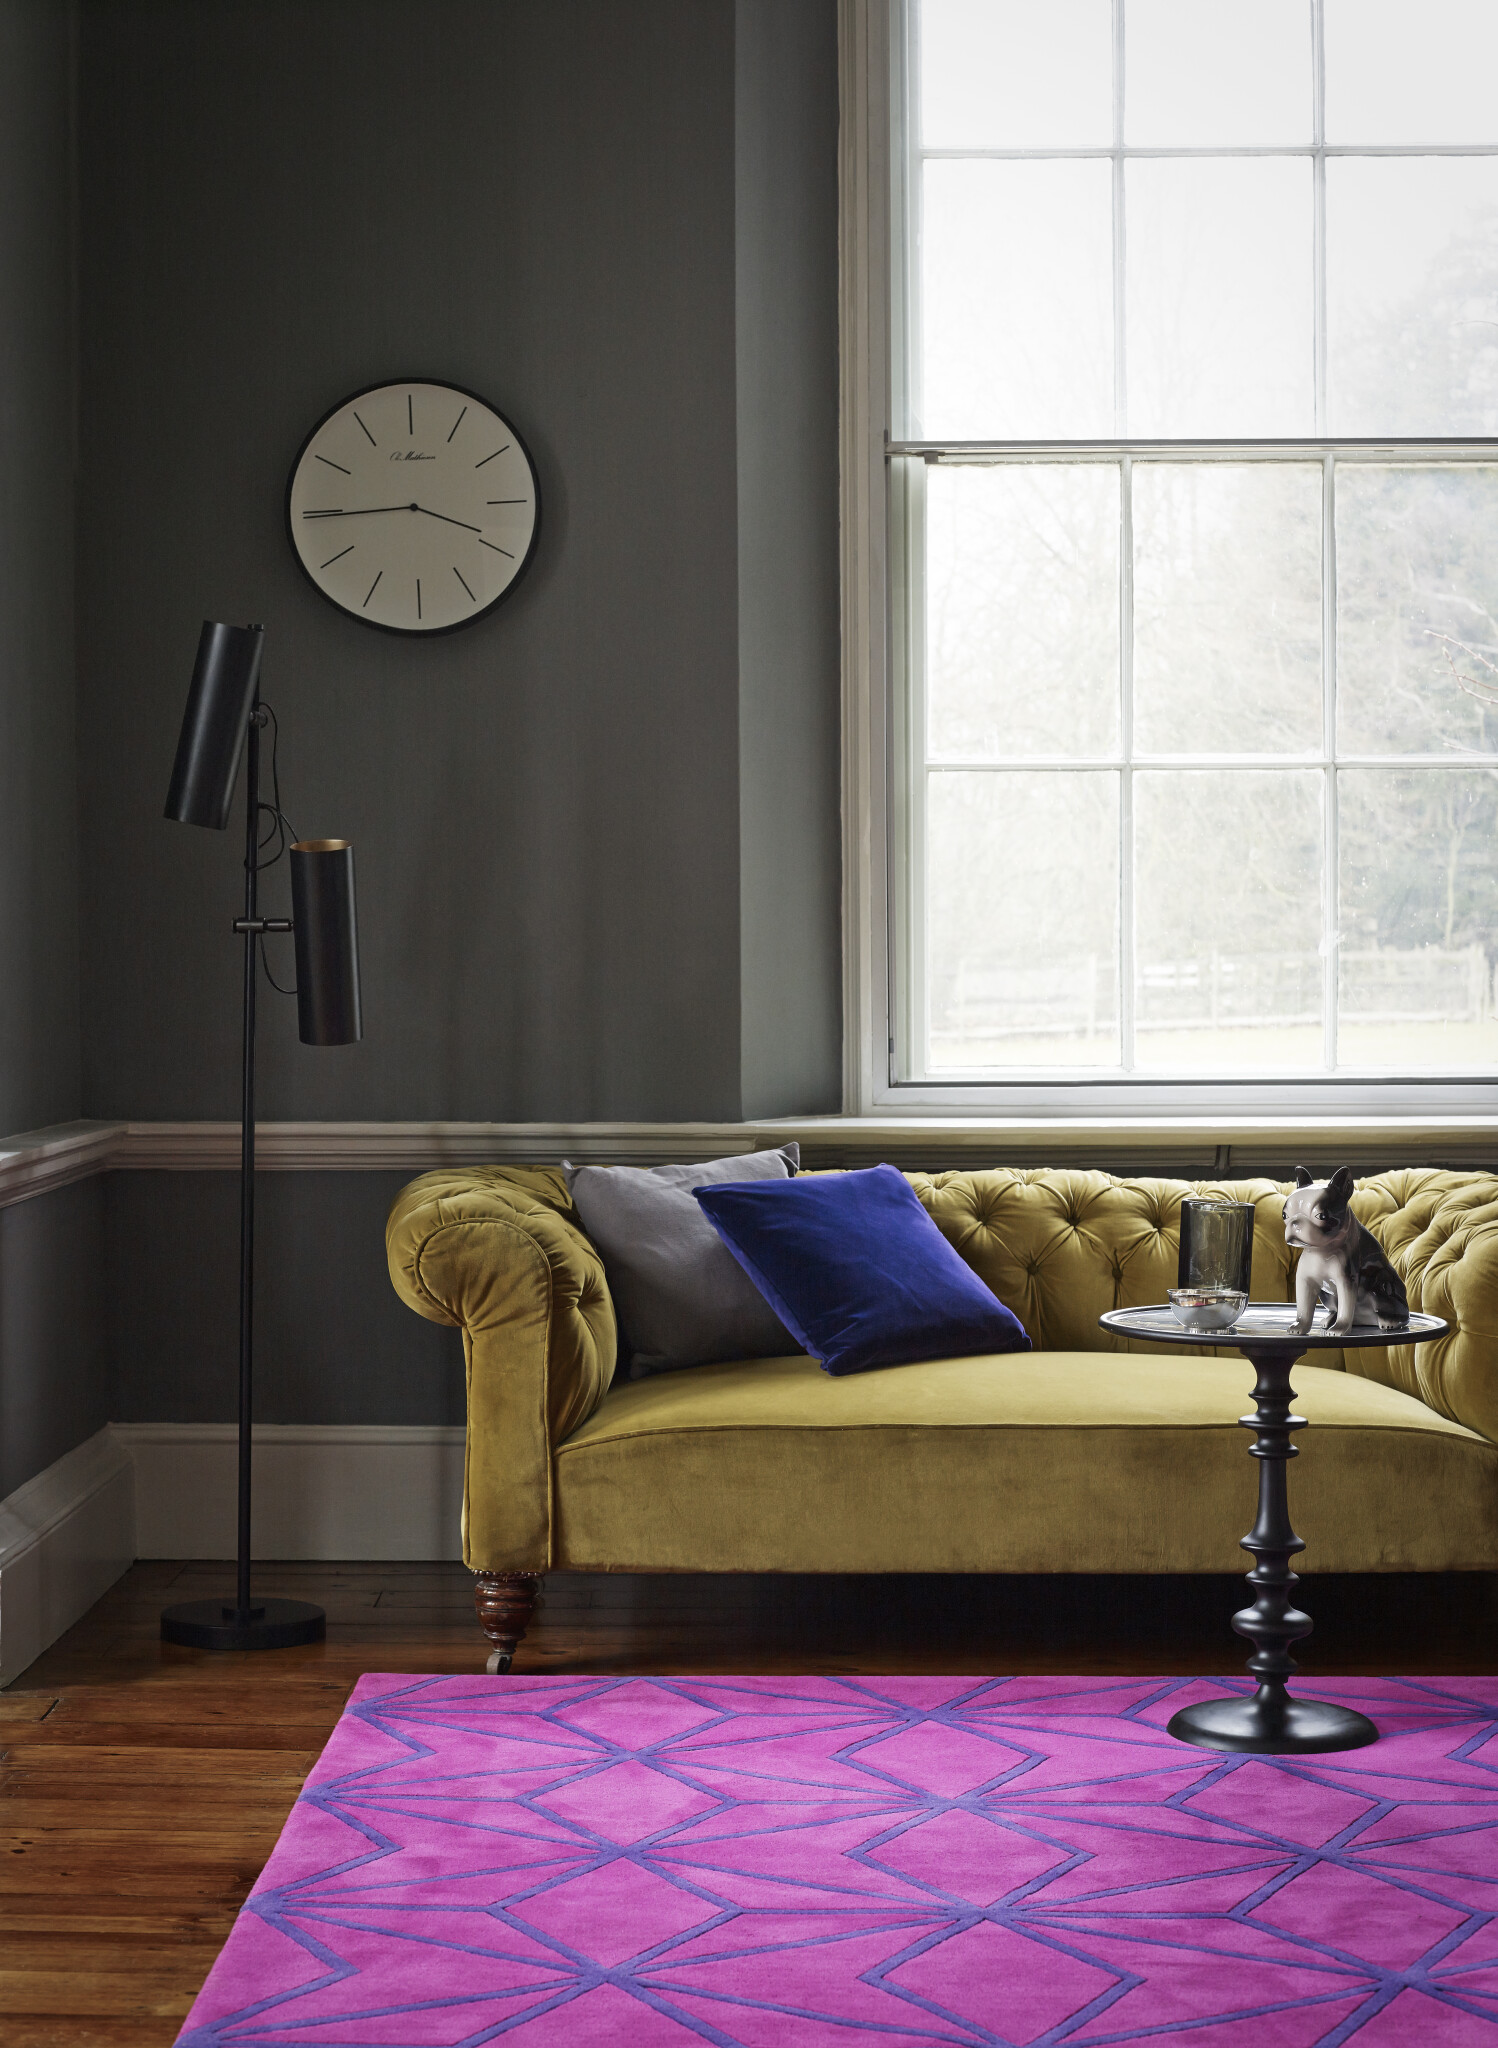 REDLOH_Go Bold Collection_Loomah Bespoke Carpets & Rugs_Styled By Lucy Gough_ Photography By David Cleveland